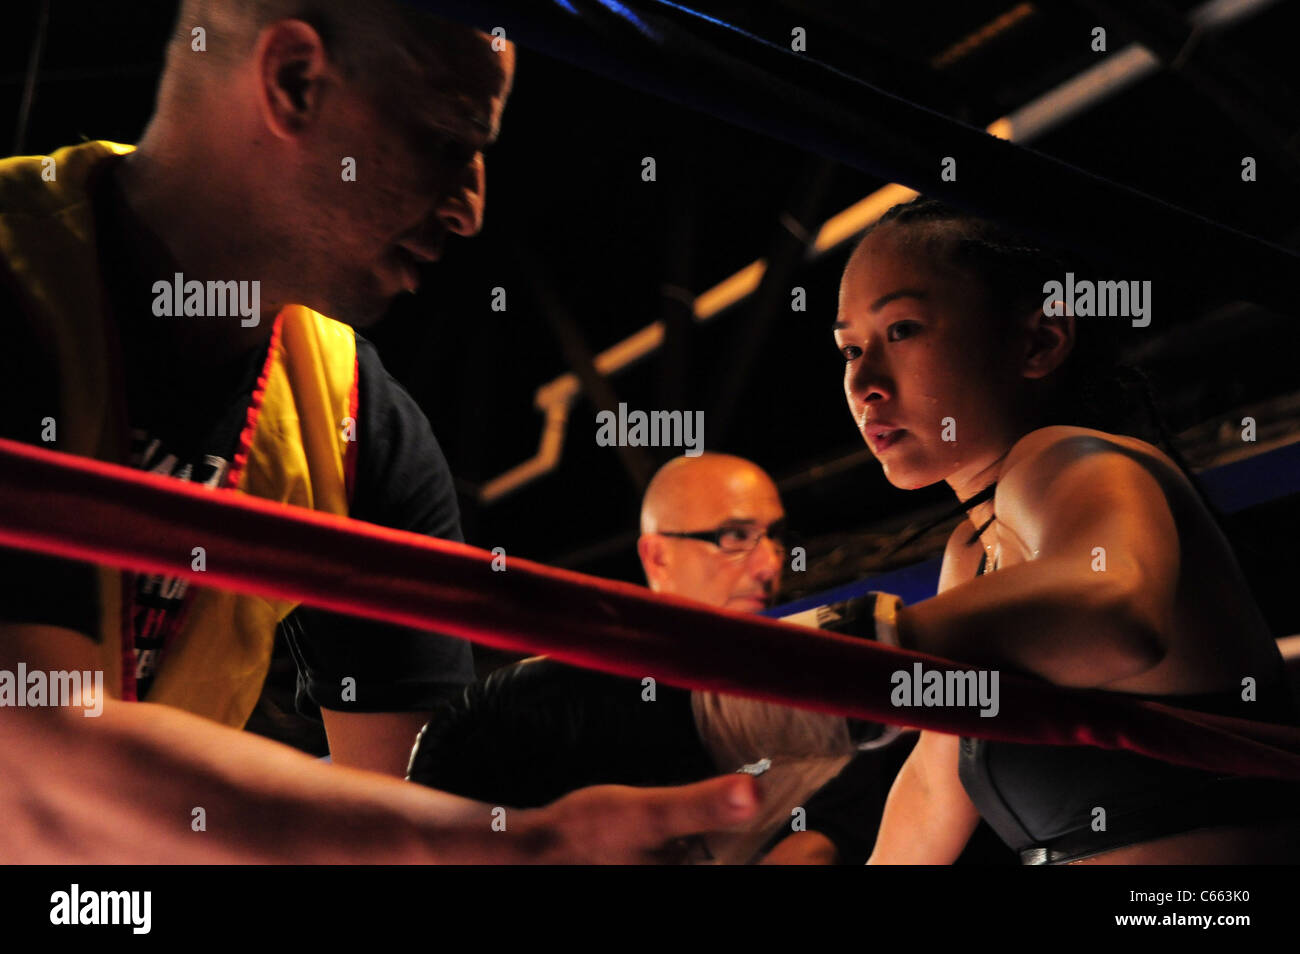 Jessica Ng at a public appearance for TAKE ON SHOW Presents $10,000 Professional Muay Thai Kickboxing Tournament, 7 Train Theater, Flushing, NY July 17, 2010. Photo By: Gregorio T. Binuya/Everett Collection Stock Photo